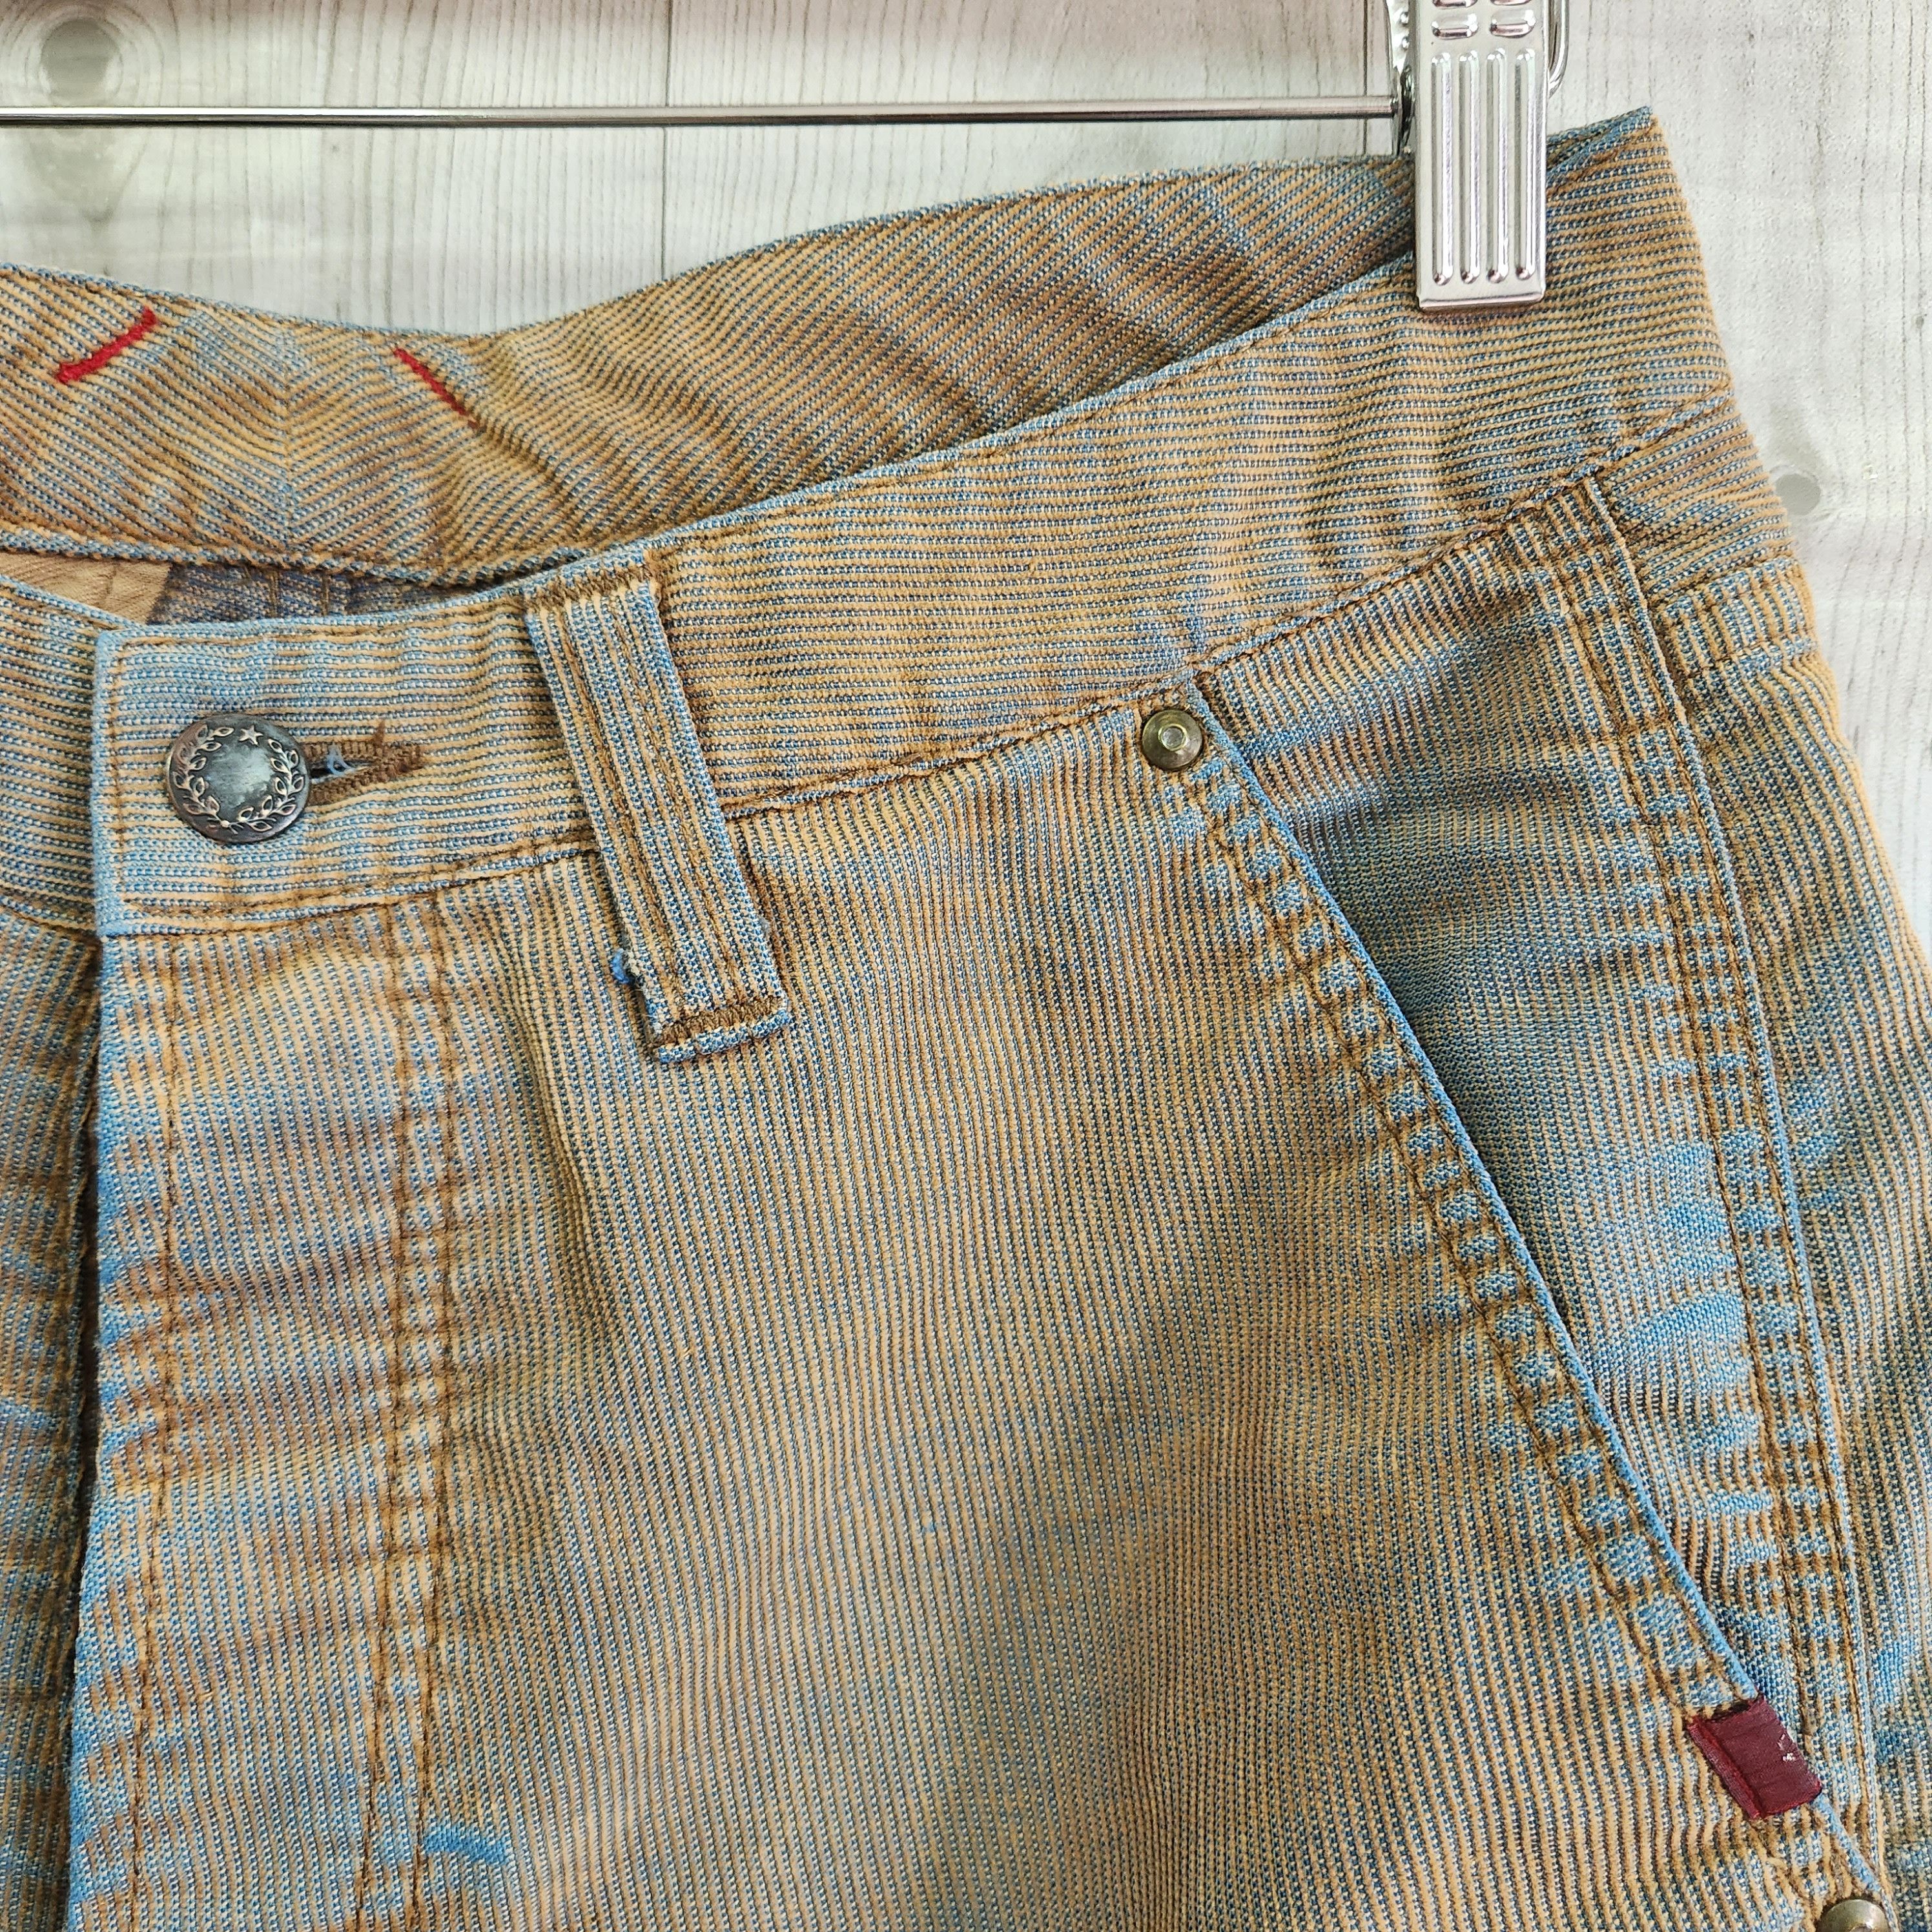 Key Acquisitions - Acquiesce Distressed Faded Bluish Denim Jeans Japanese - 4